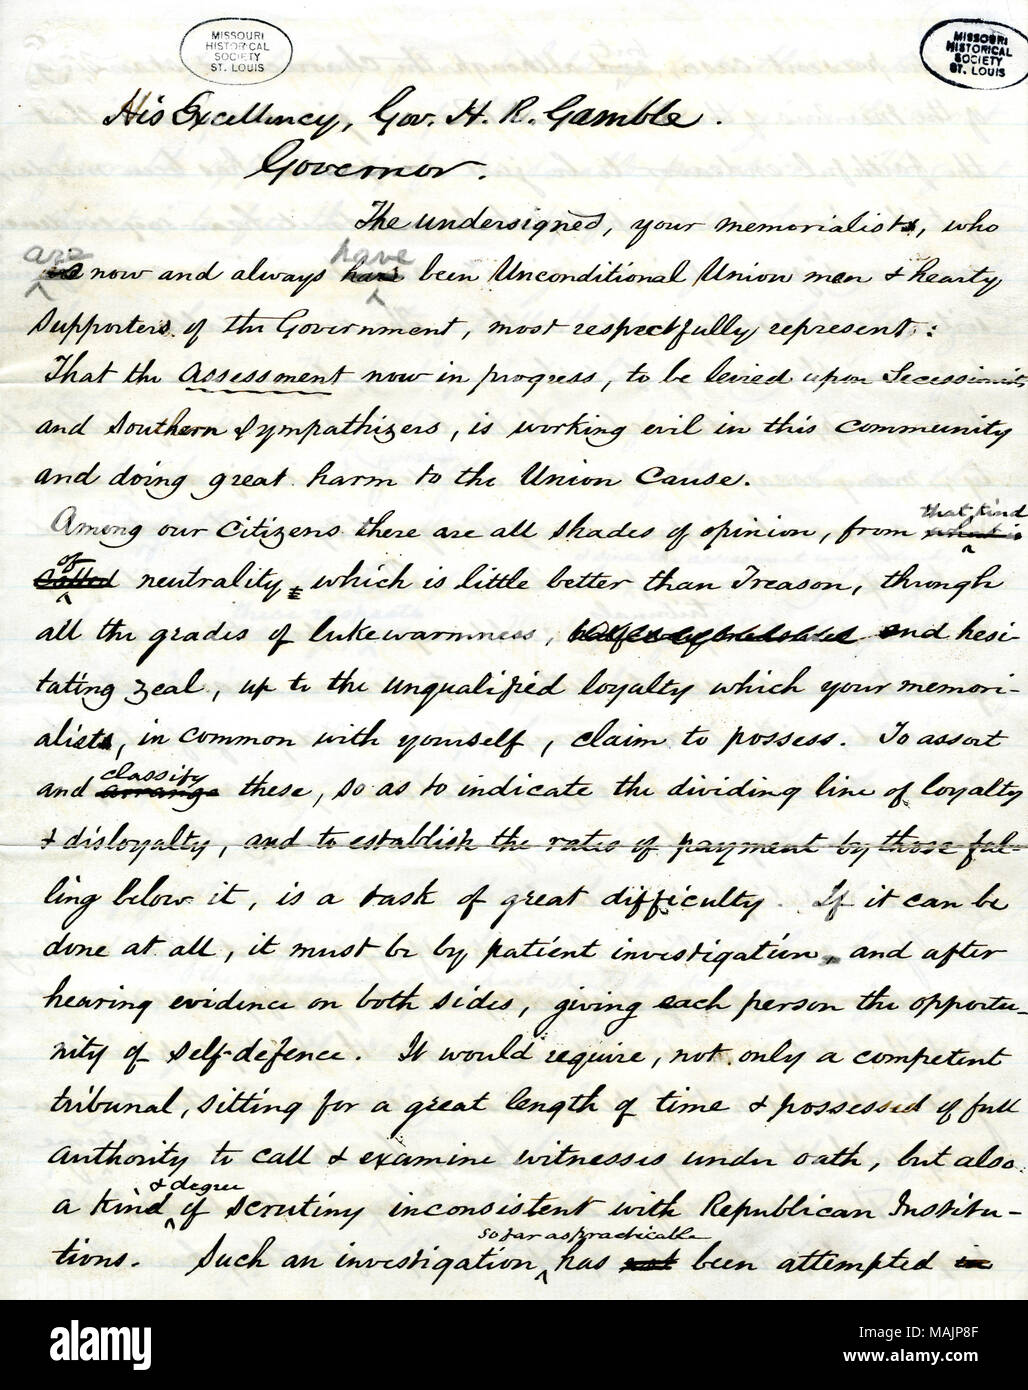 Petitions Governor Gamble by saying that the loyalty assessment policies currently in progress, which are levied upon assumed secessionists and southern sympathizers, are ineffective and evil, and writes that any assessment of loyalty should be based on clear evidence and careful investigation.  Transcription: His Excellency, Gov. H. R. Gamble [Hamilton R. Gamble]. Governor. The undersigned, your memorialits, who is are now and always has have been Unconditional Union men & hearty supporters of the Government, most respectfully represent: that the assessment now in progress, to be levied upon  Stock Photo